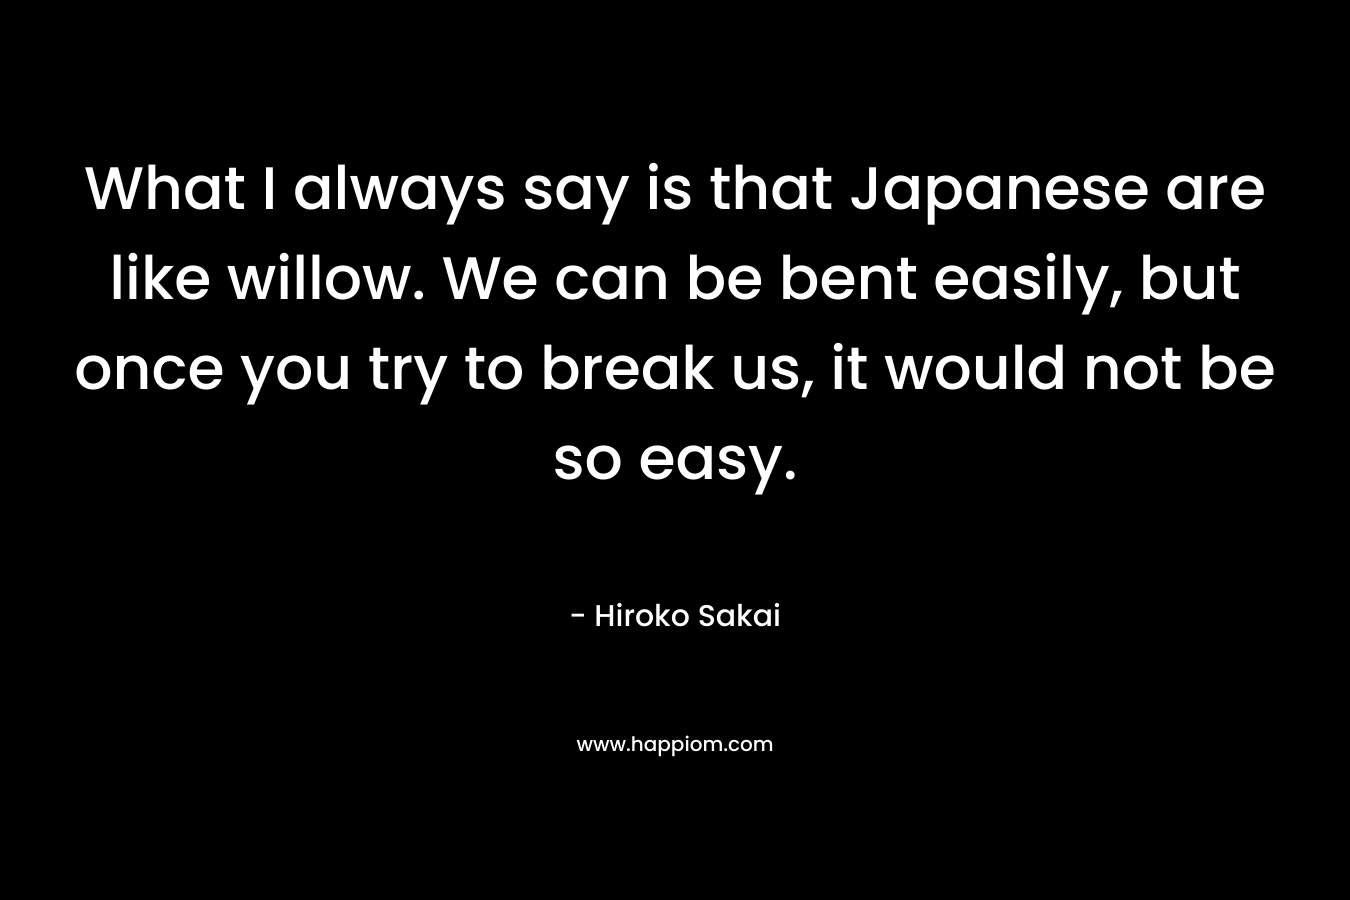 What I always say is that Japanese are like willow. We can be bent easily, but once you try to break us, it would not be so easy. – Hiroko Sakai